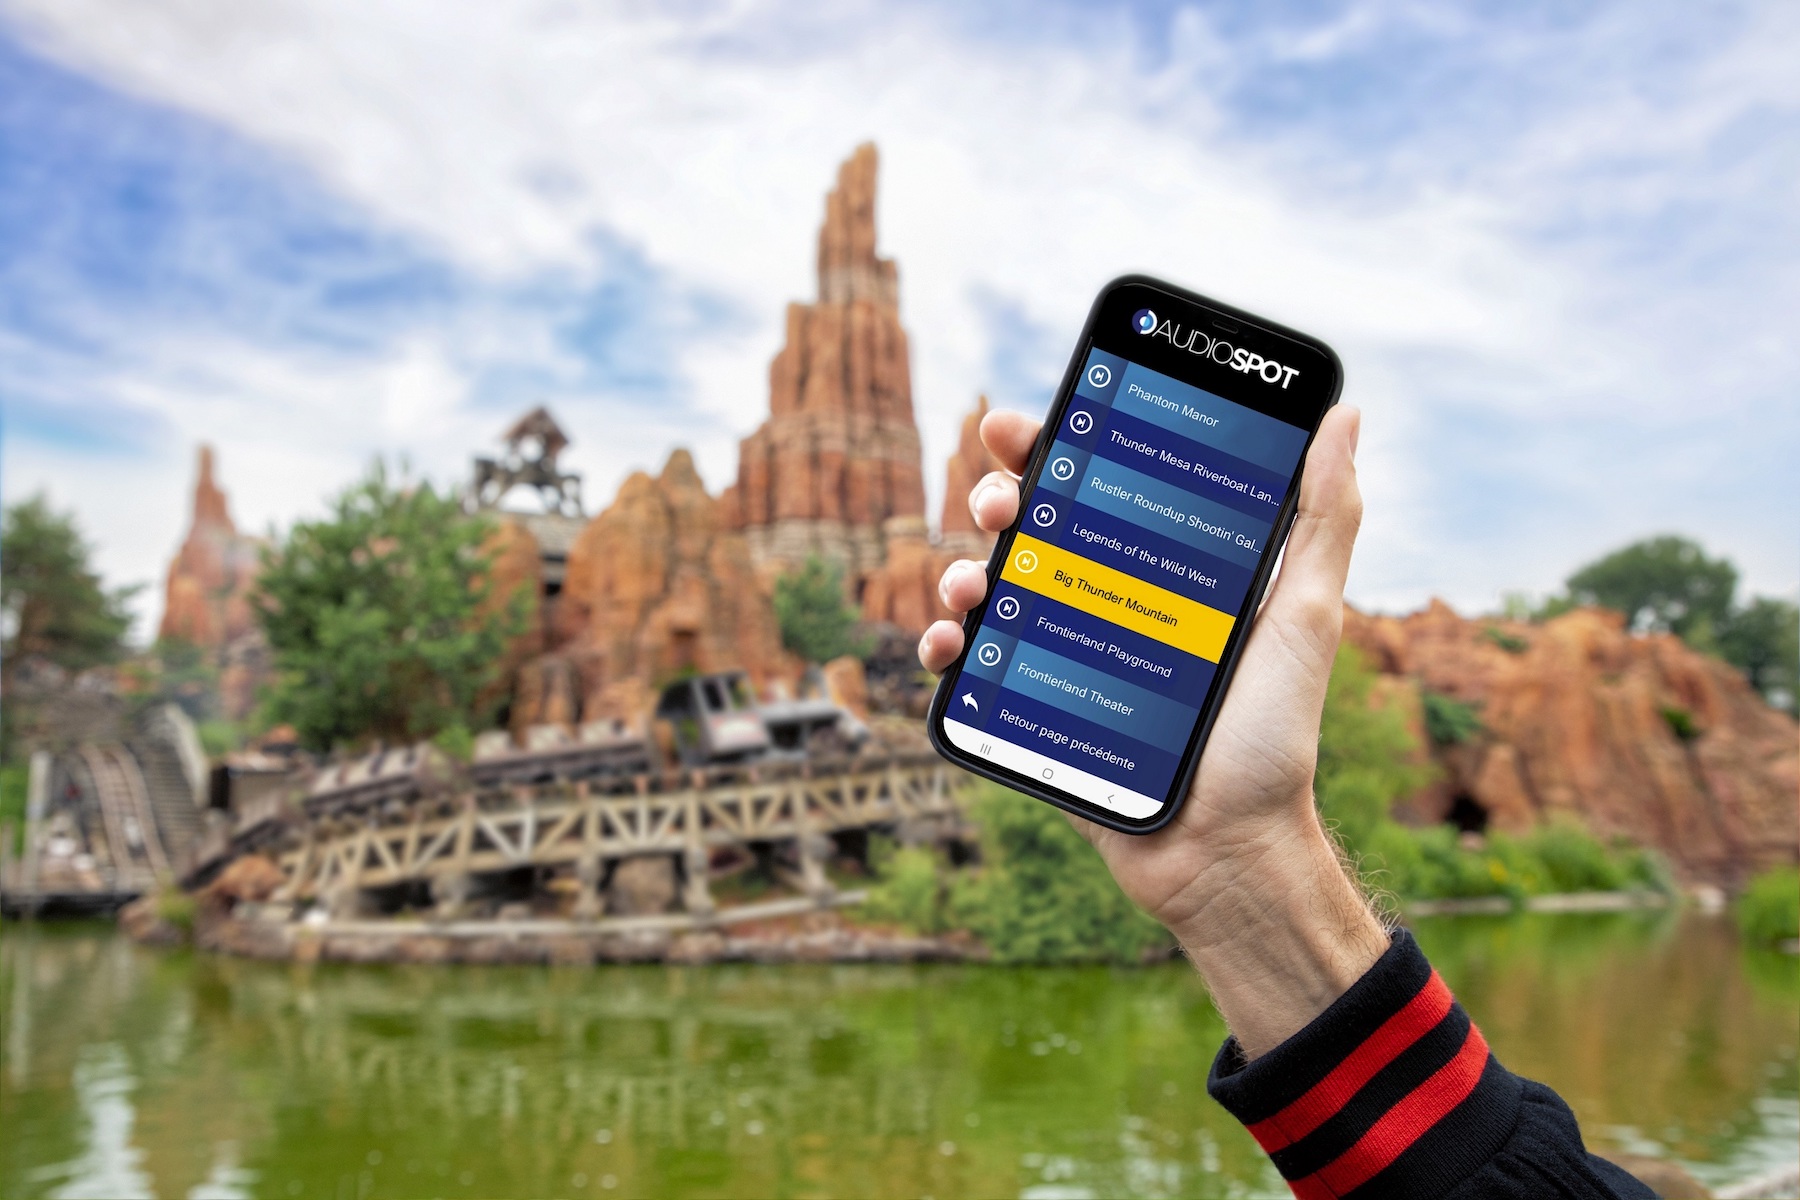 DISNEYLAND PARIS INTRODUCES AUDIO DESCRIPTION ACROSS RESORT FOR VISUALLY IMPAIRED AND BLIND GUESTS